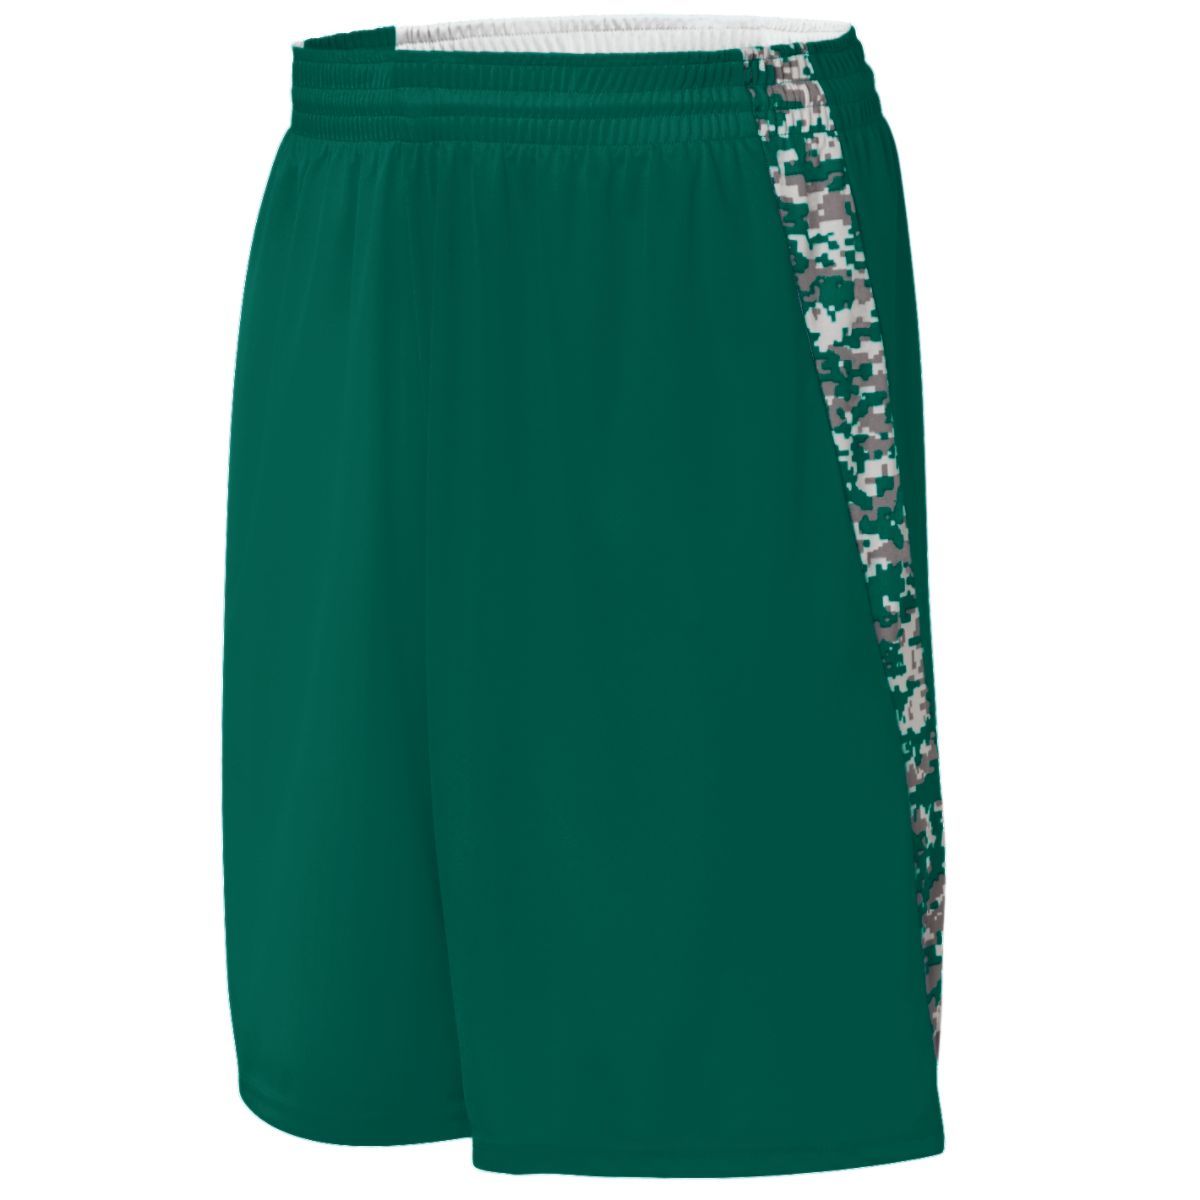 Augusta Sportswear Hook Shot Reversible Shorts in Dark Green/Dark Green Digi  -Part of the Adult, Adult-Shorts, Augusta-Products, Basketball, All-Sports, All-Sports-1 product lines at KanaleyCreations.com